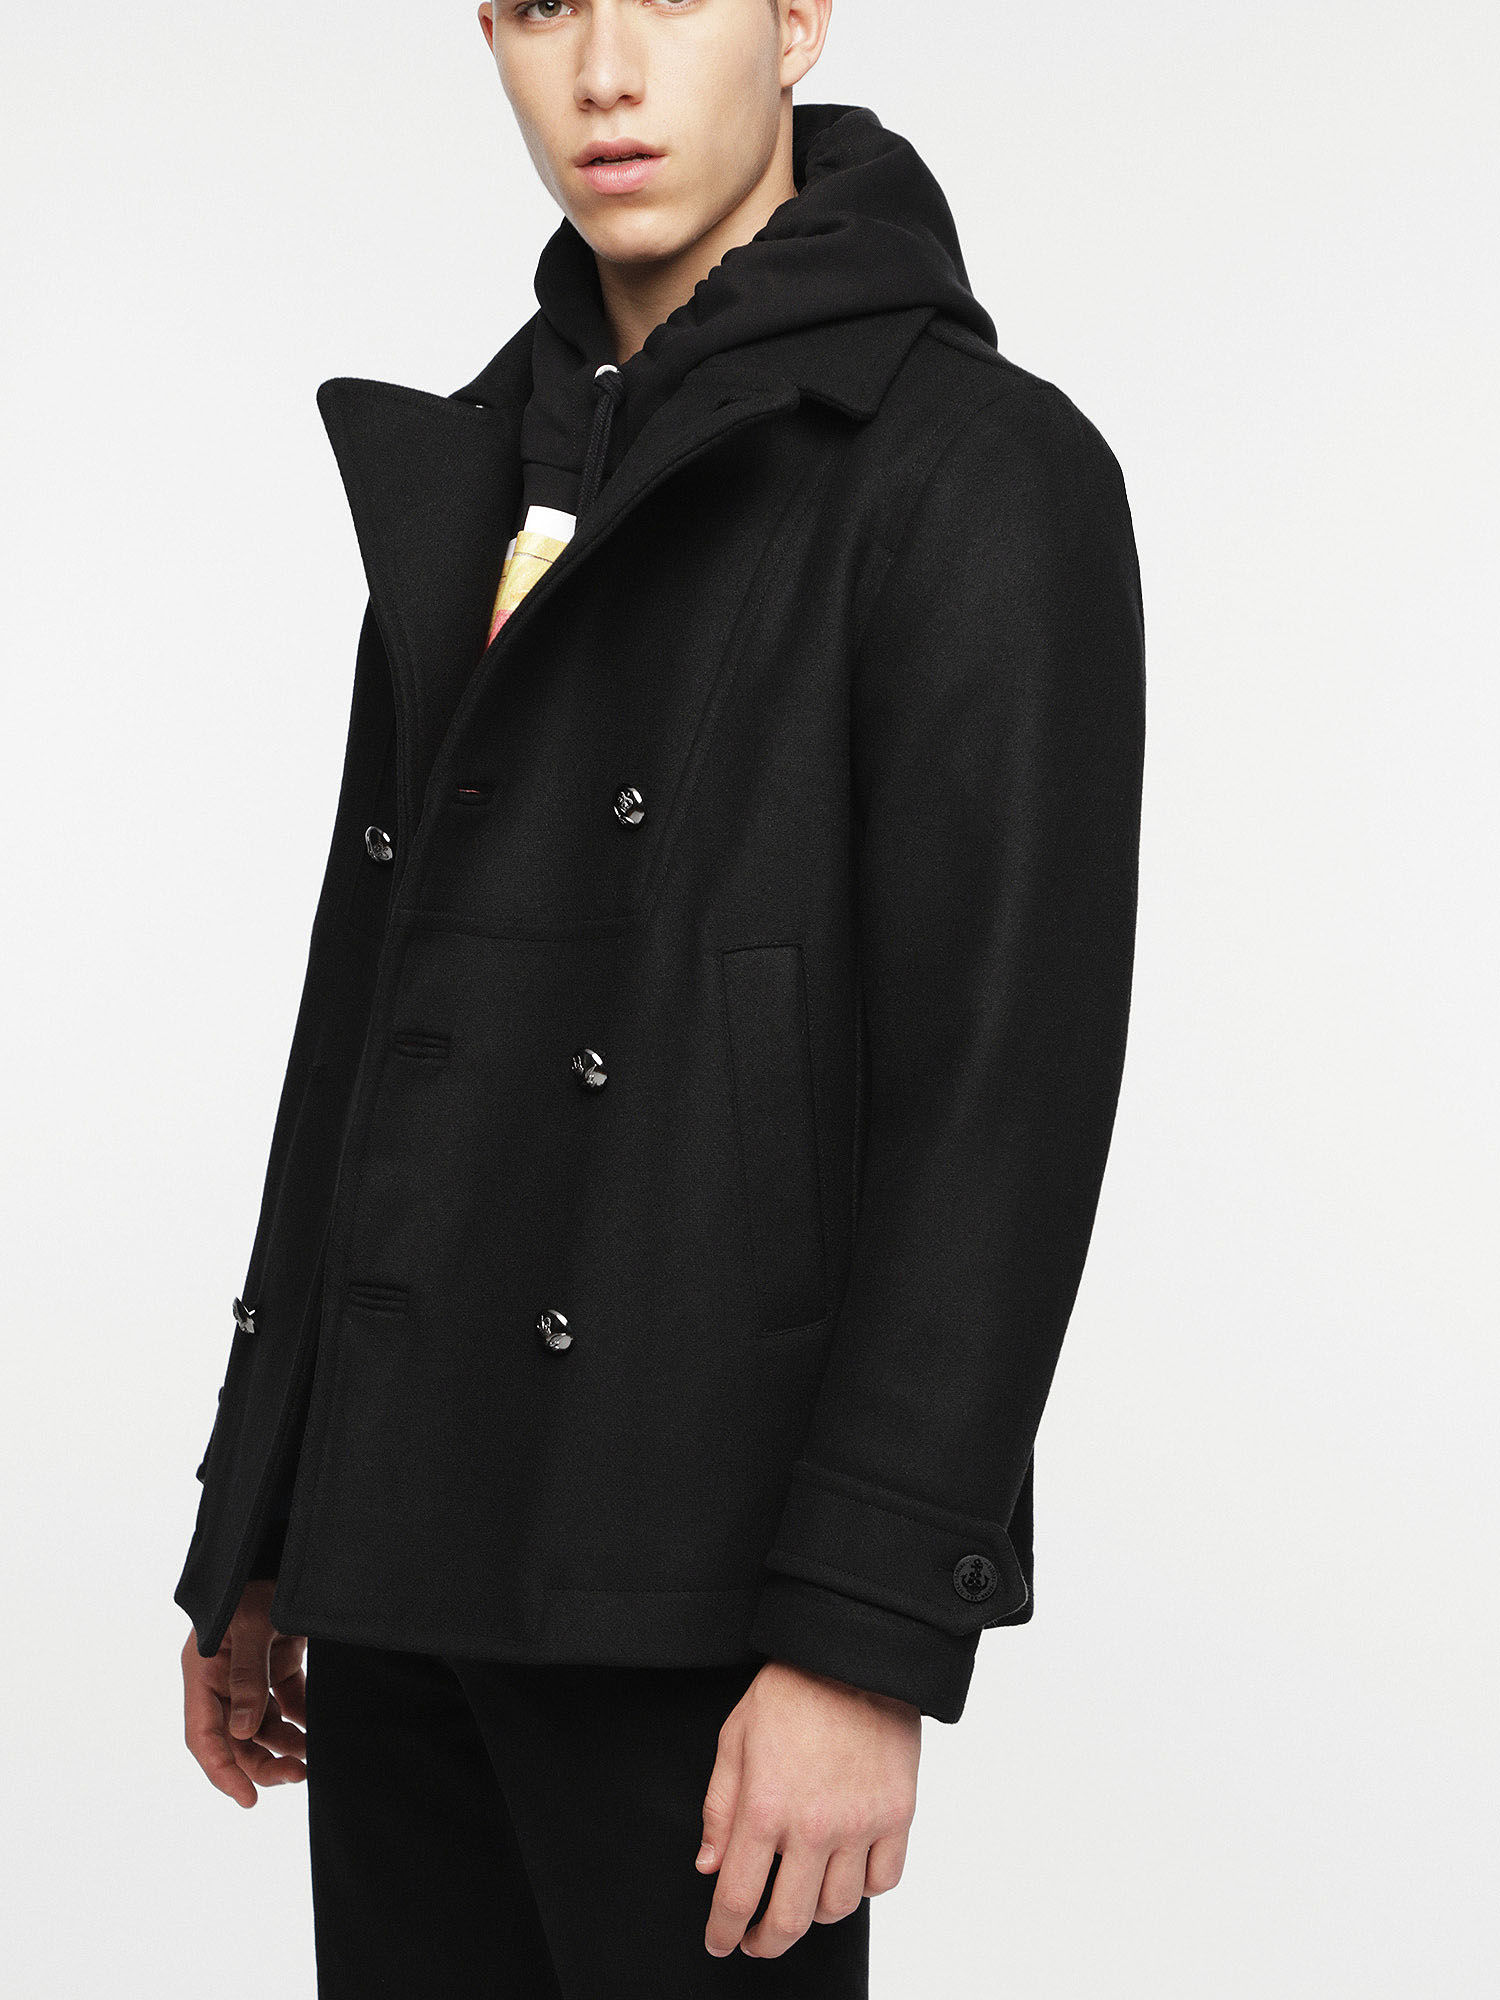 Winter jacket with teddy lining